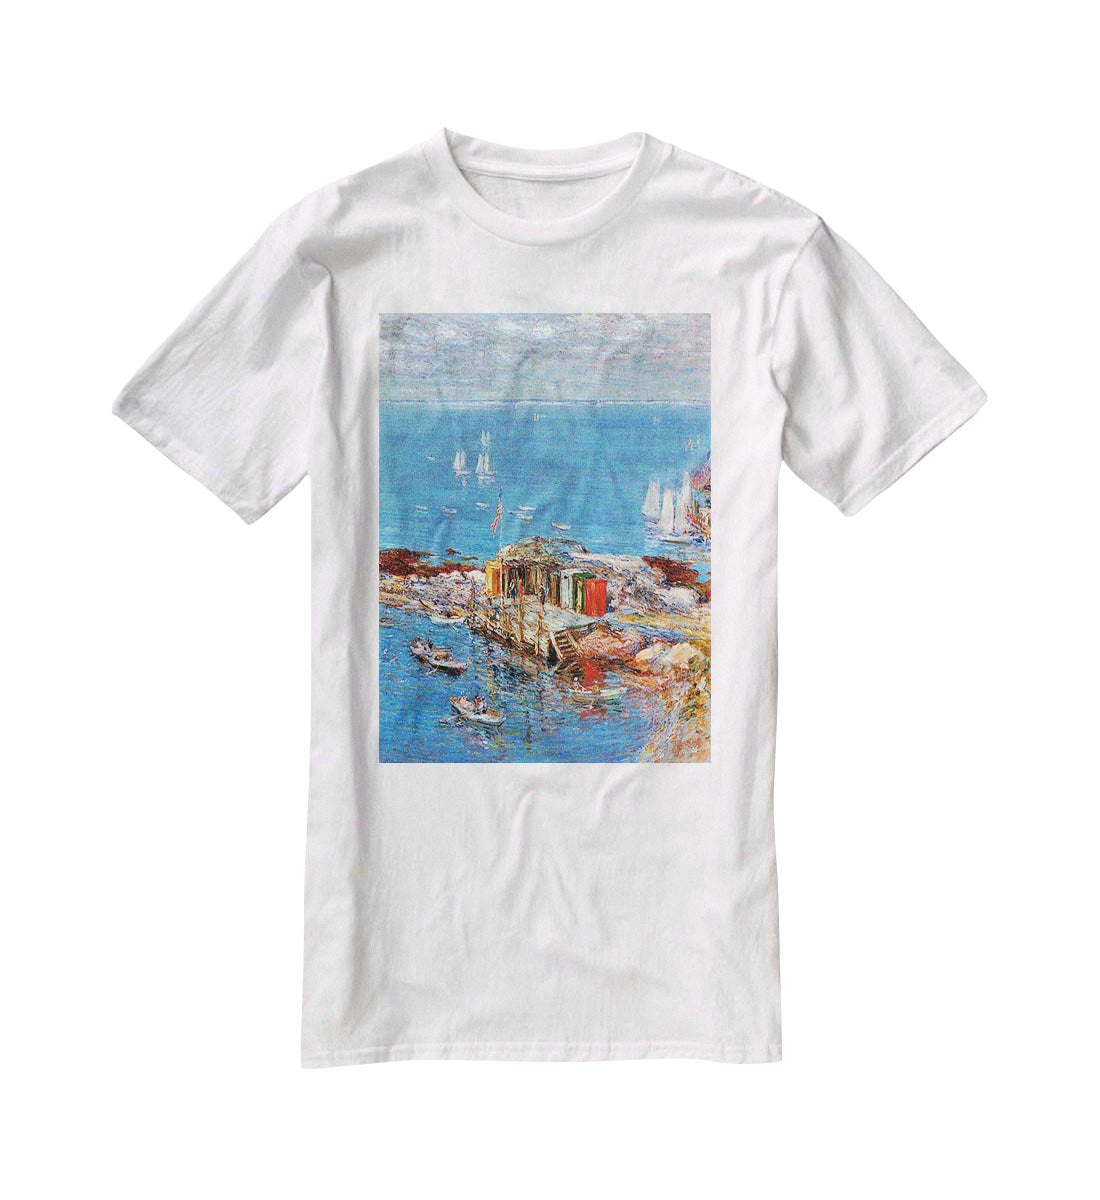 Afternoon in August Appledore by Hassam T-Shirt - Canvas Art Rocks - 5